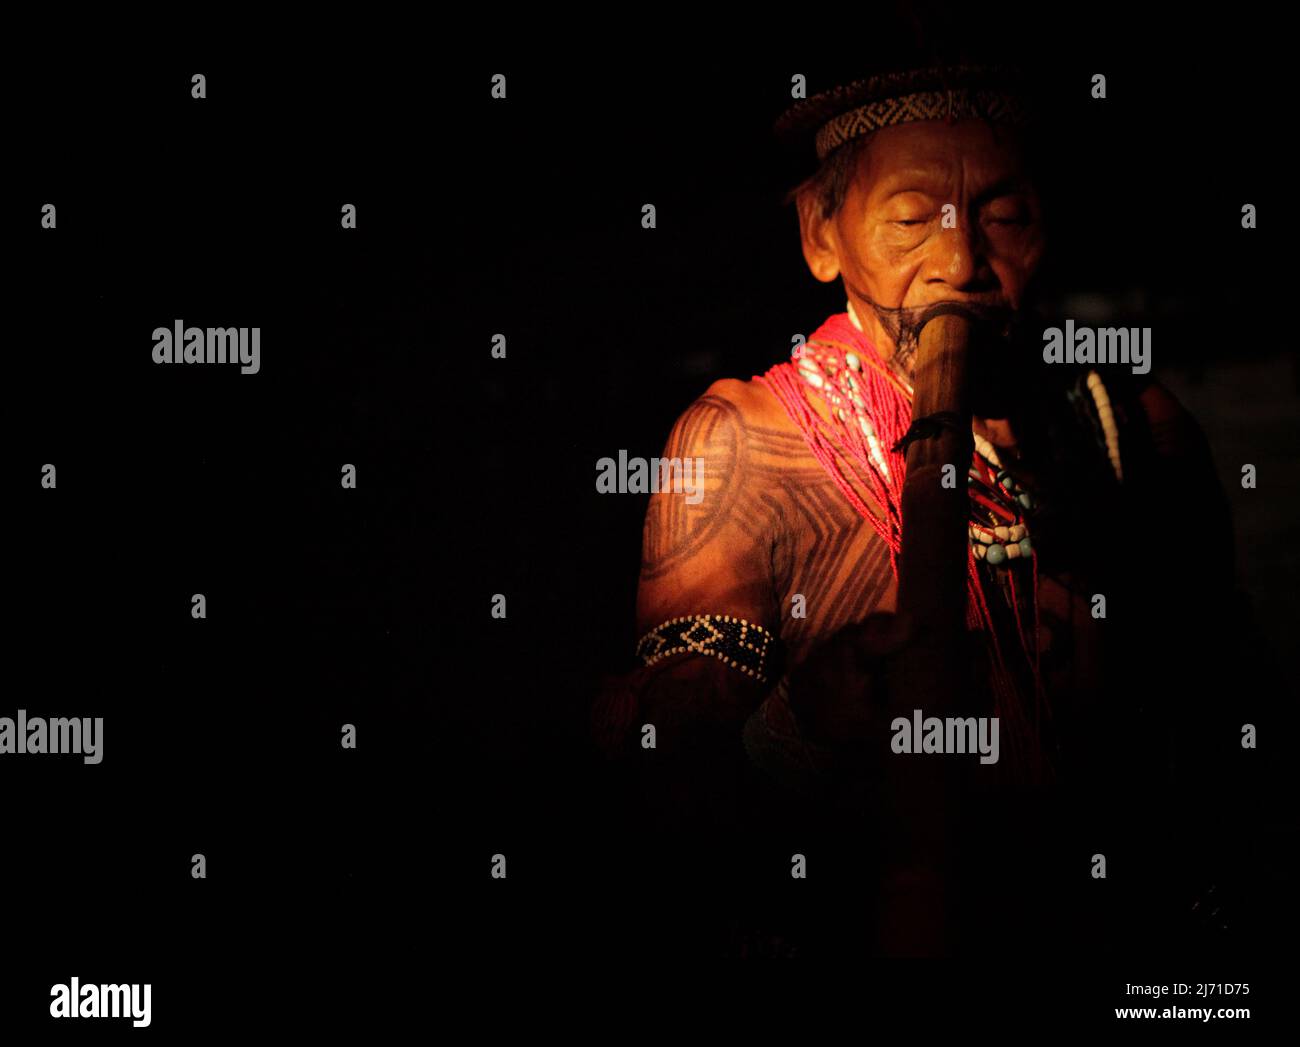 Leader of the Asurini Indigenous tribe in the Brazilian Amazon playing music instrument in the darkness . Xingu  River, Brazil, 2010. Stock Photo